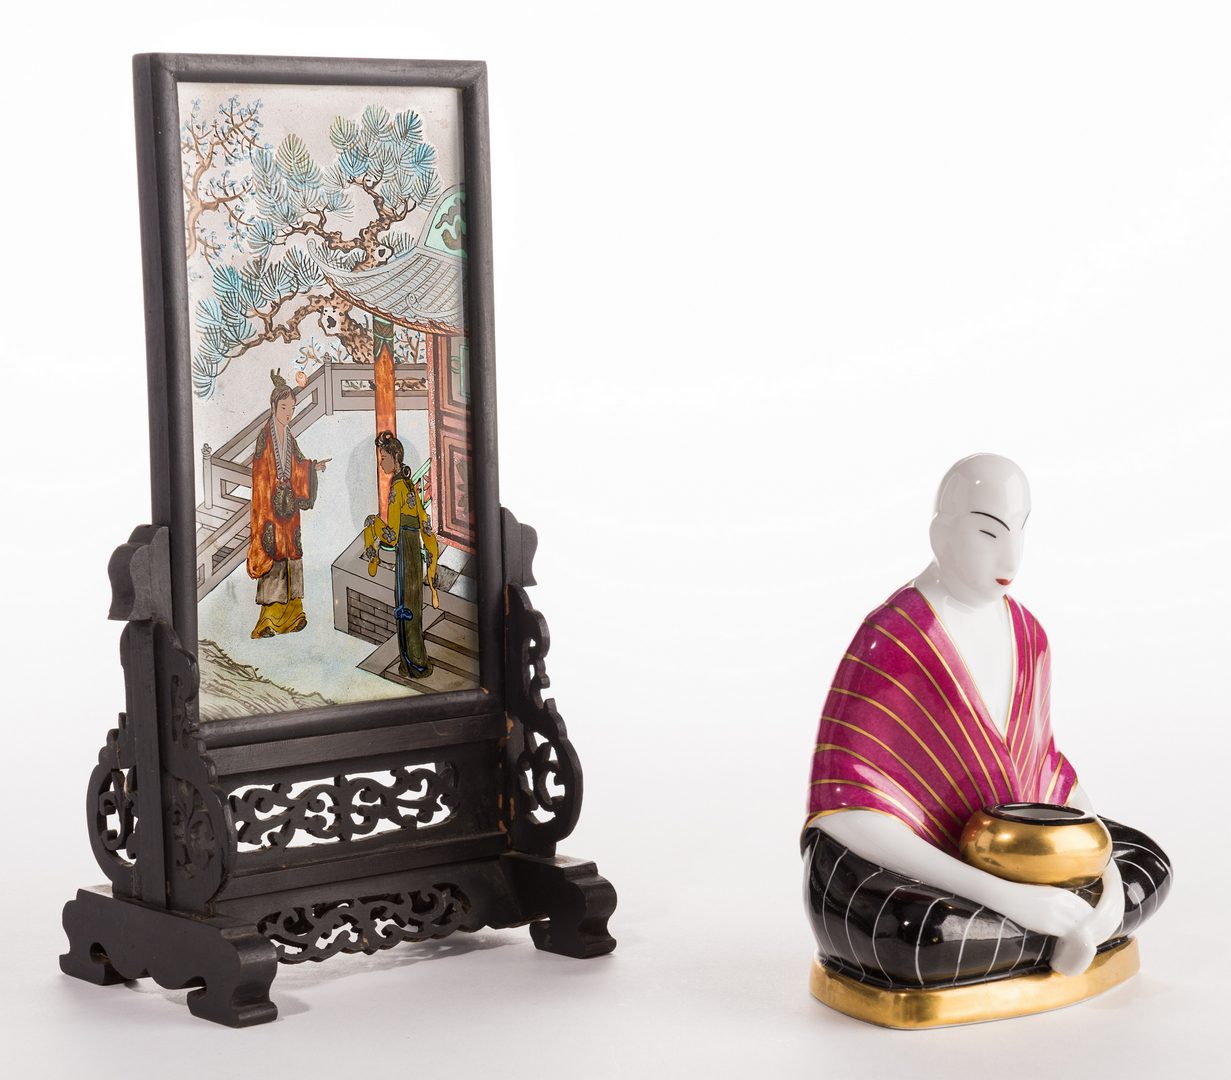 Lot 658: 4 Chinese Ancestor Portraits & 3 Asian Decorative Items, 7 items